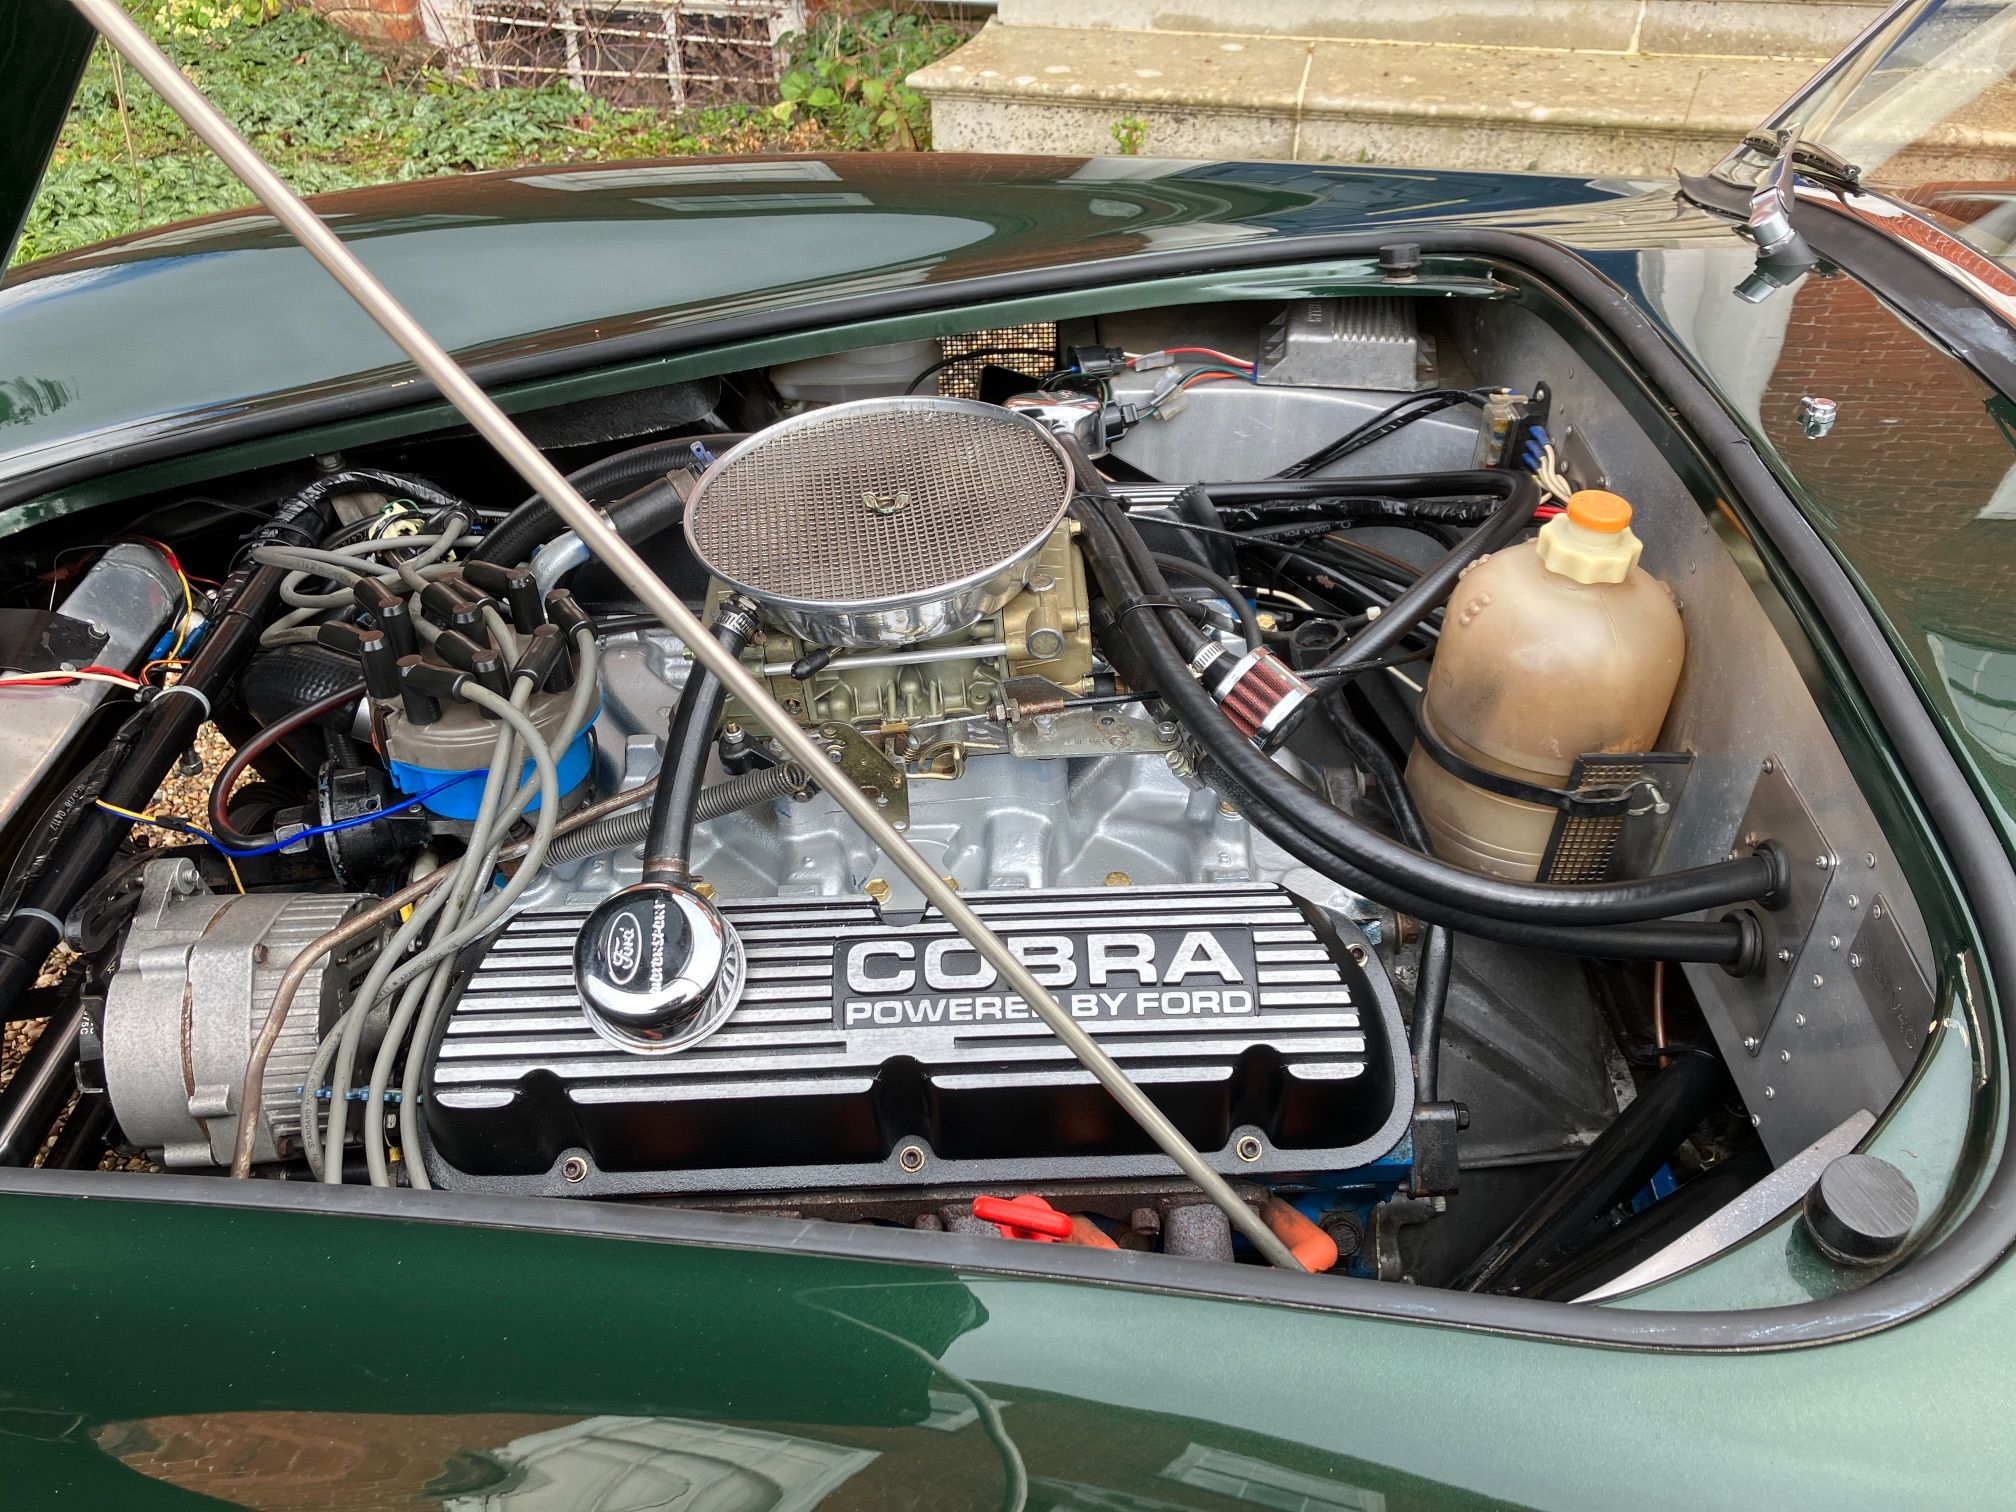 COBRA POWERED BY FORD